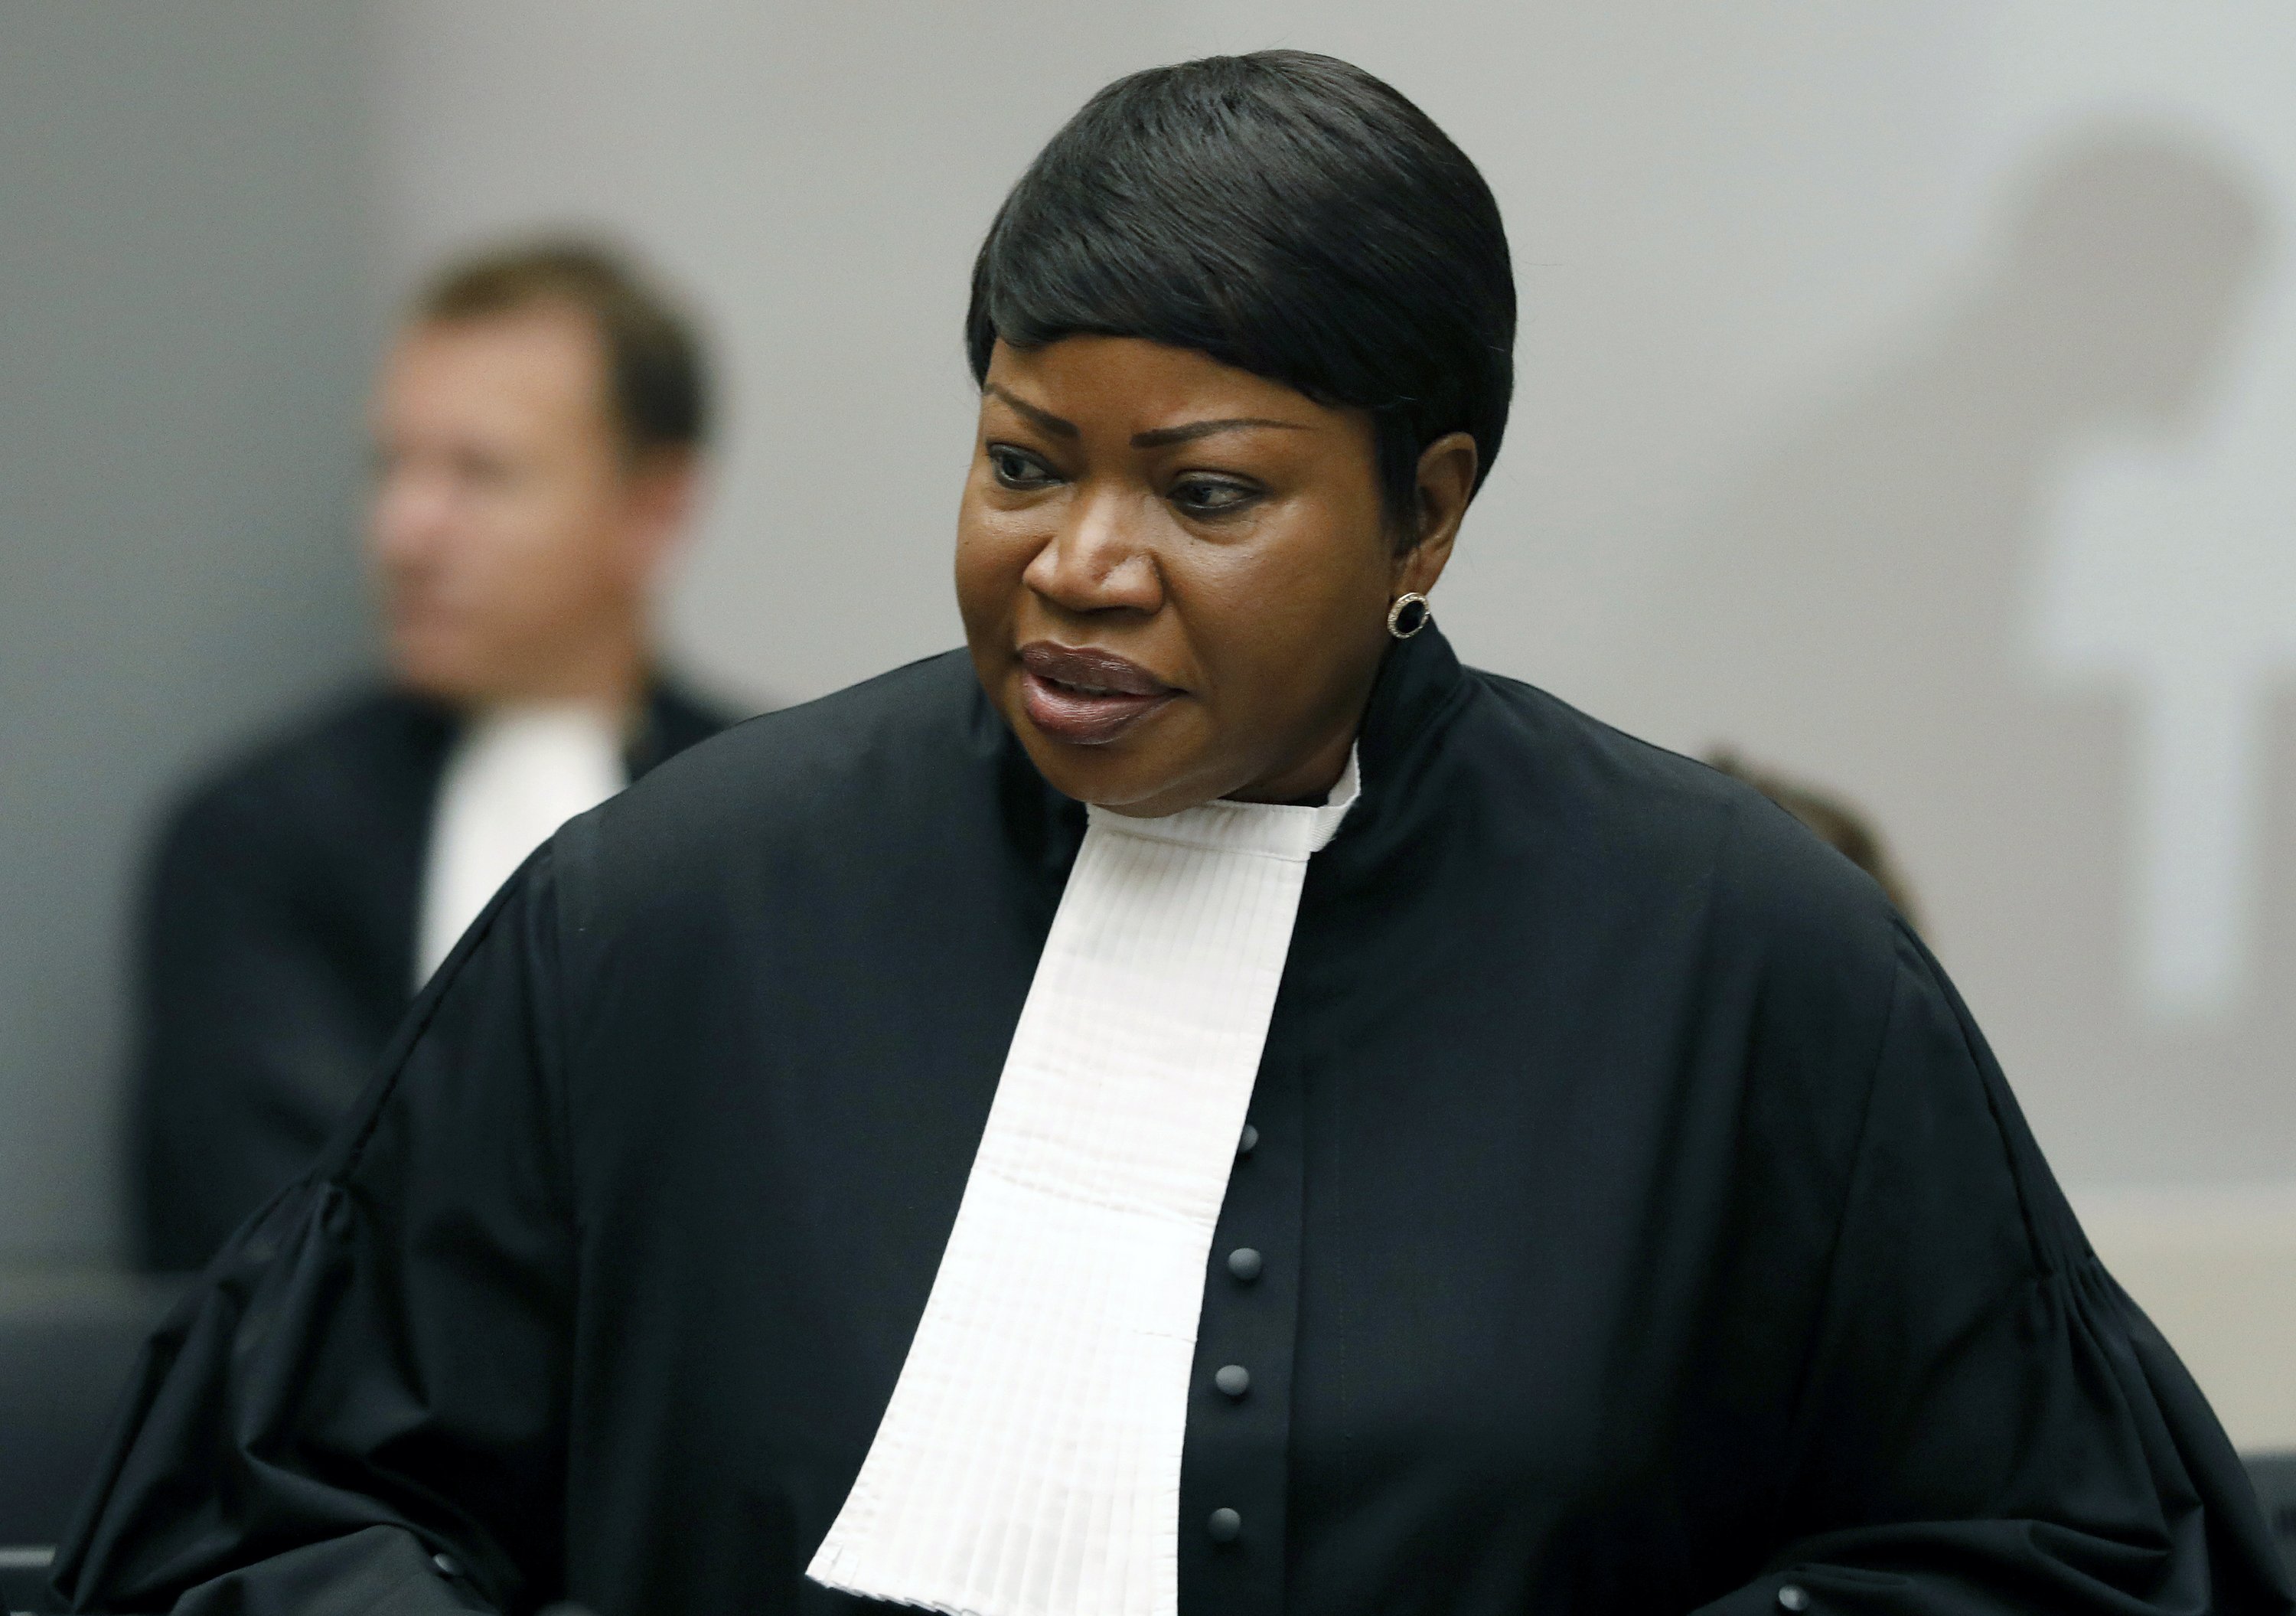 The ICC launches an investigation into war crimes into Israeli practices